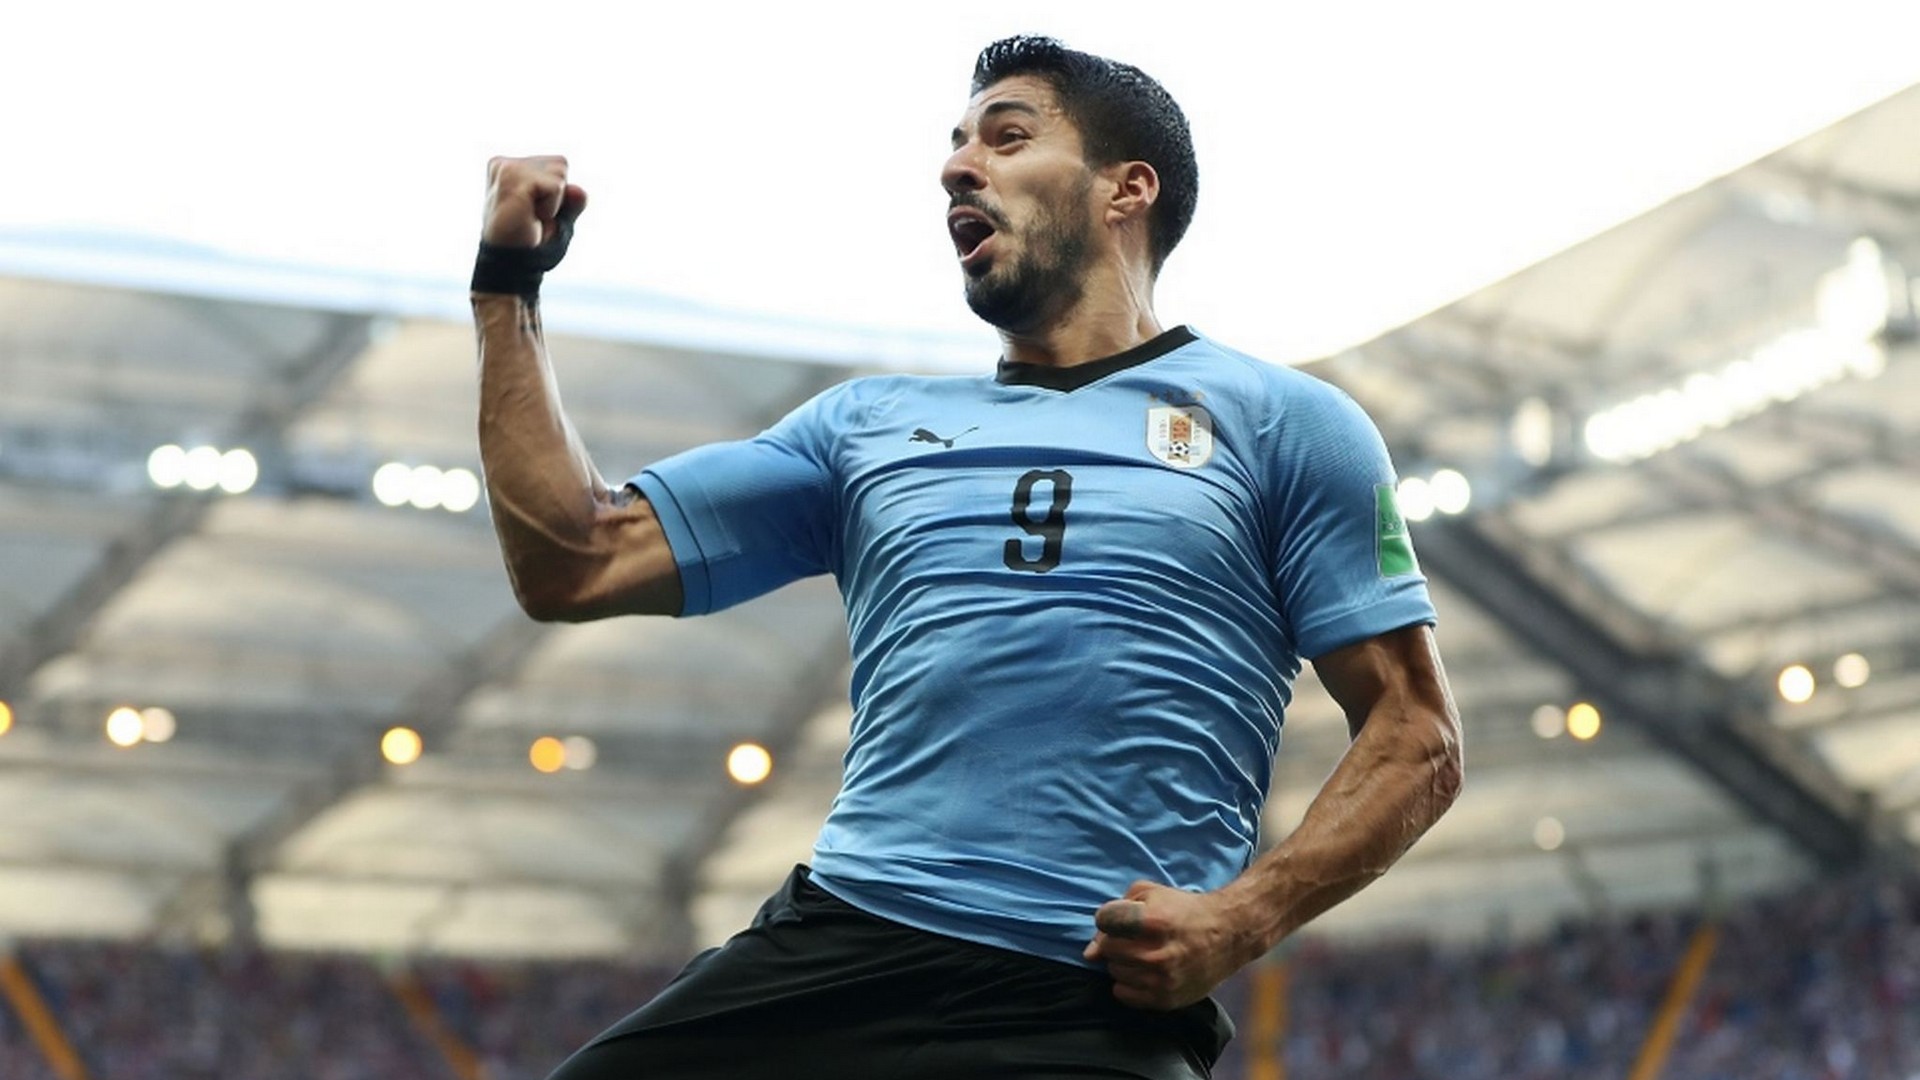 Luis Suarez Uruguay Desktop Wallpaper with image resolution 1920x1080 pixel. You can use this wallpaper as background for your desktop Computer Screensavers, Android or iPhone smartphones